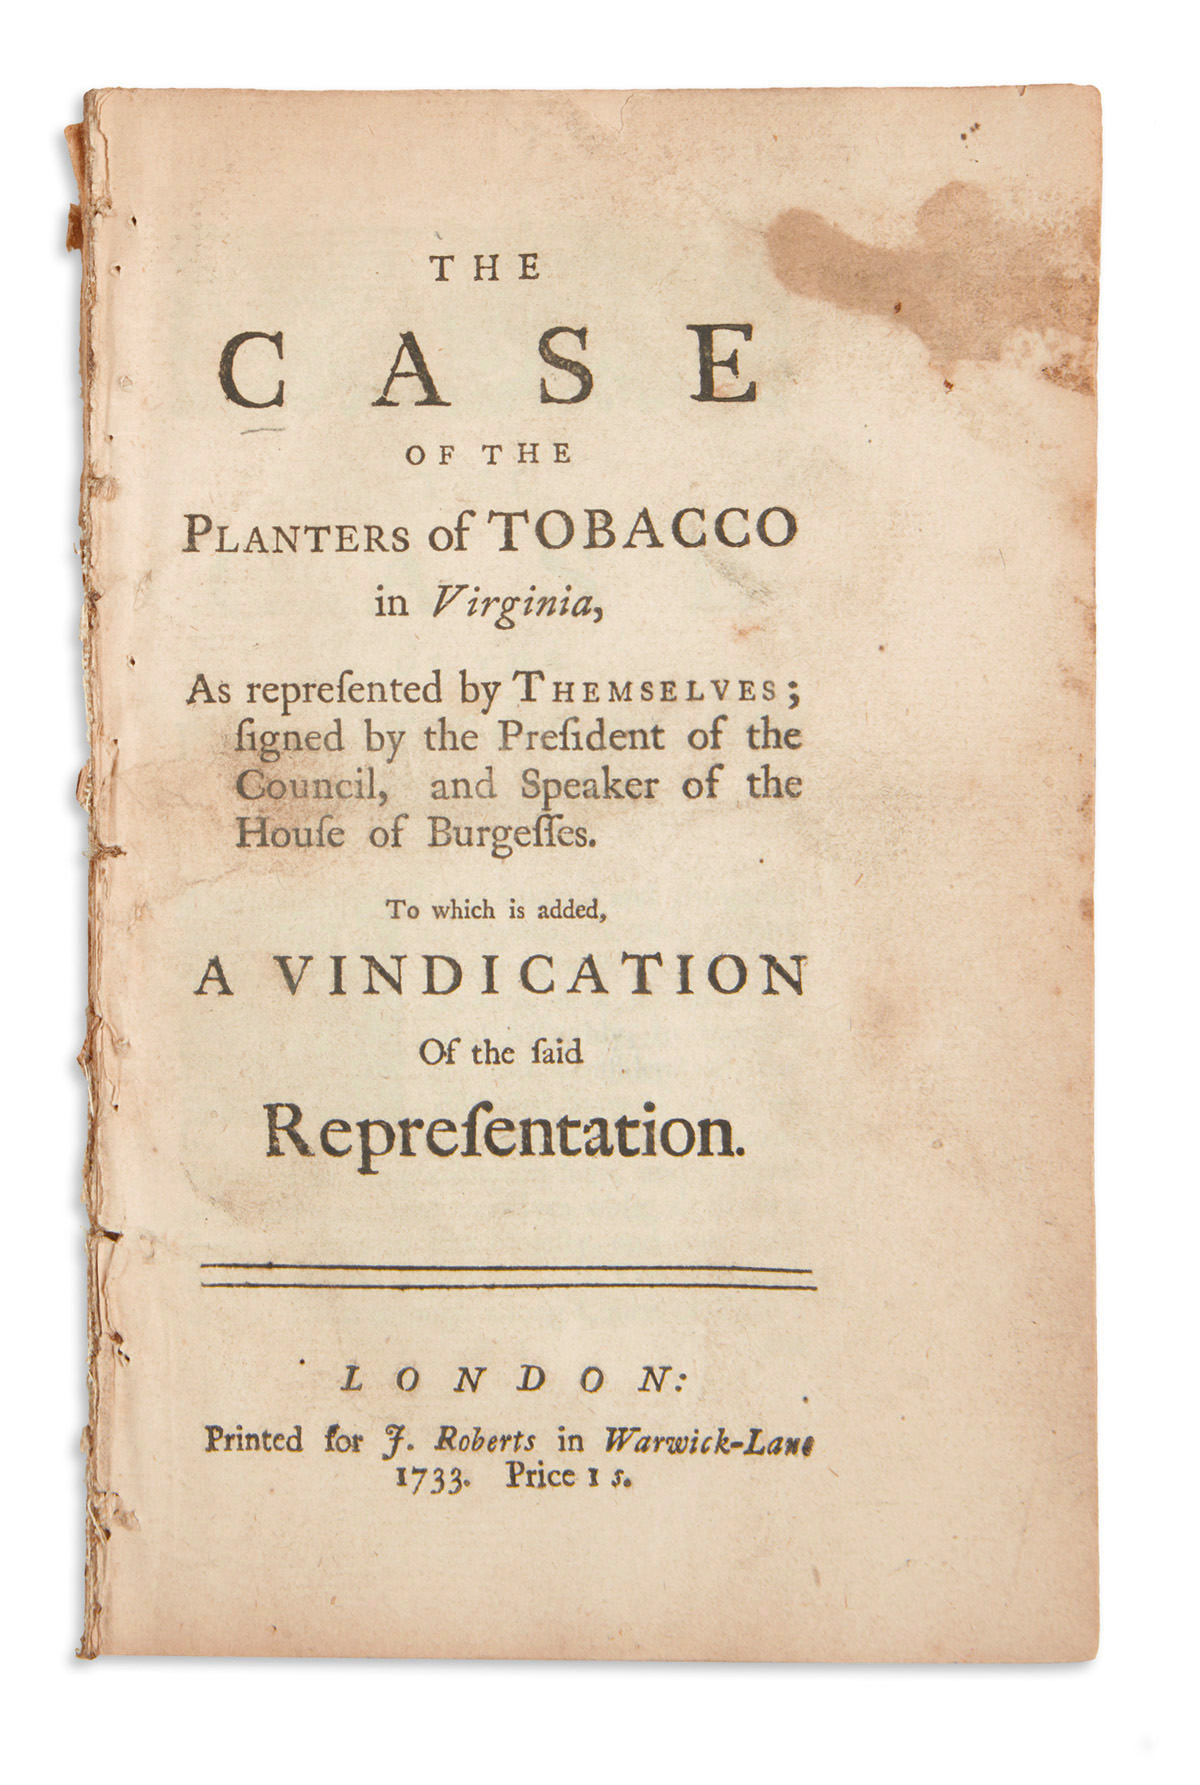 (VIRGINIA.) The Case of the Planters of Tobacco in Virginia.